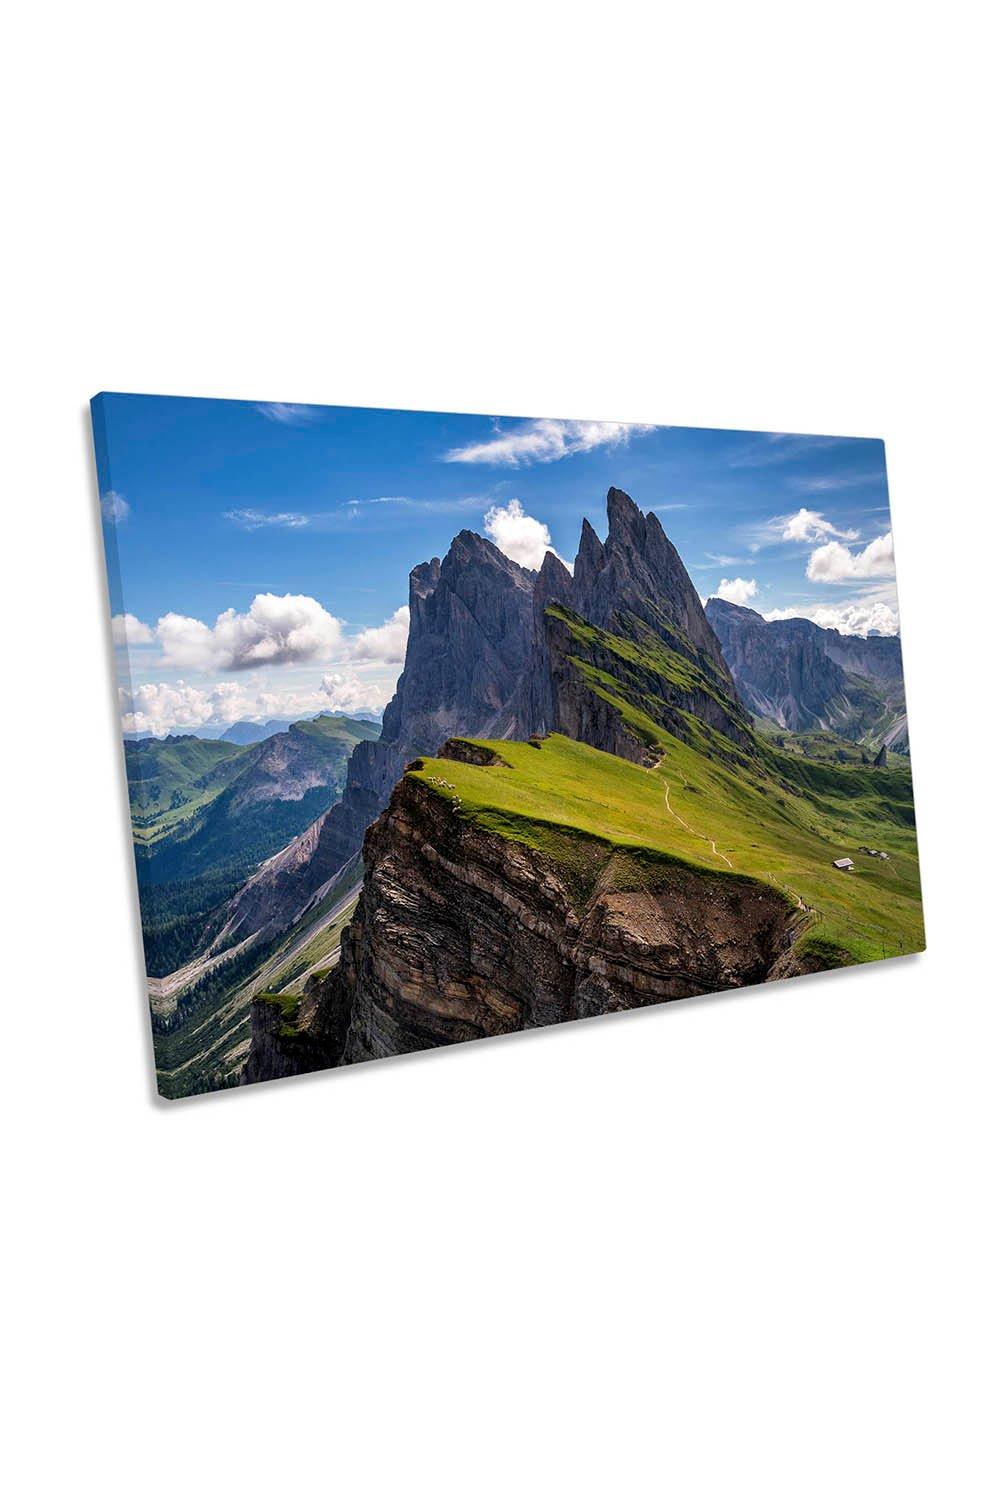 On the Edge Dolomites Mountains Landscape Canvas Wall Art Picture Print